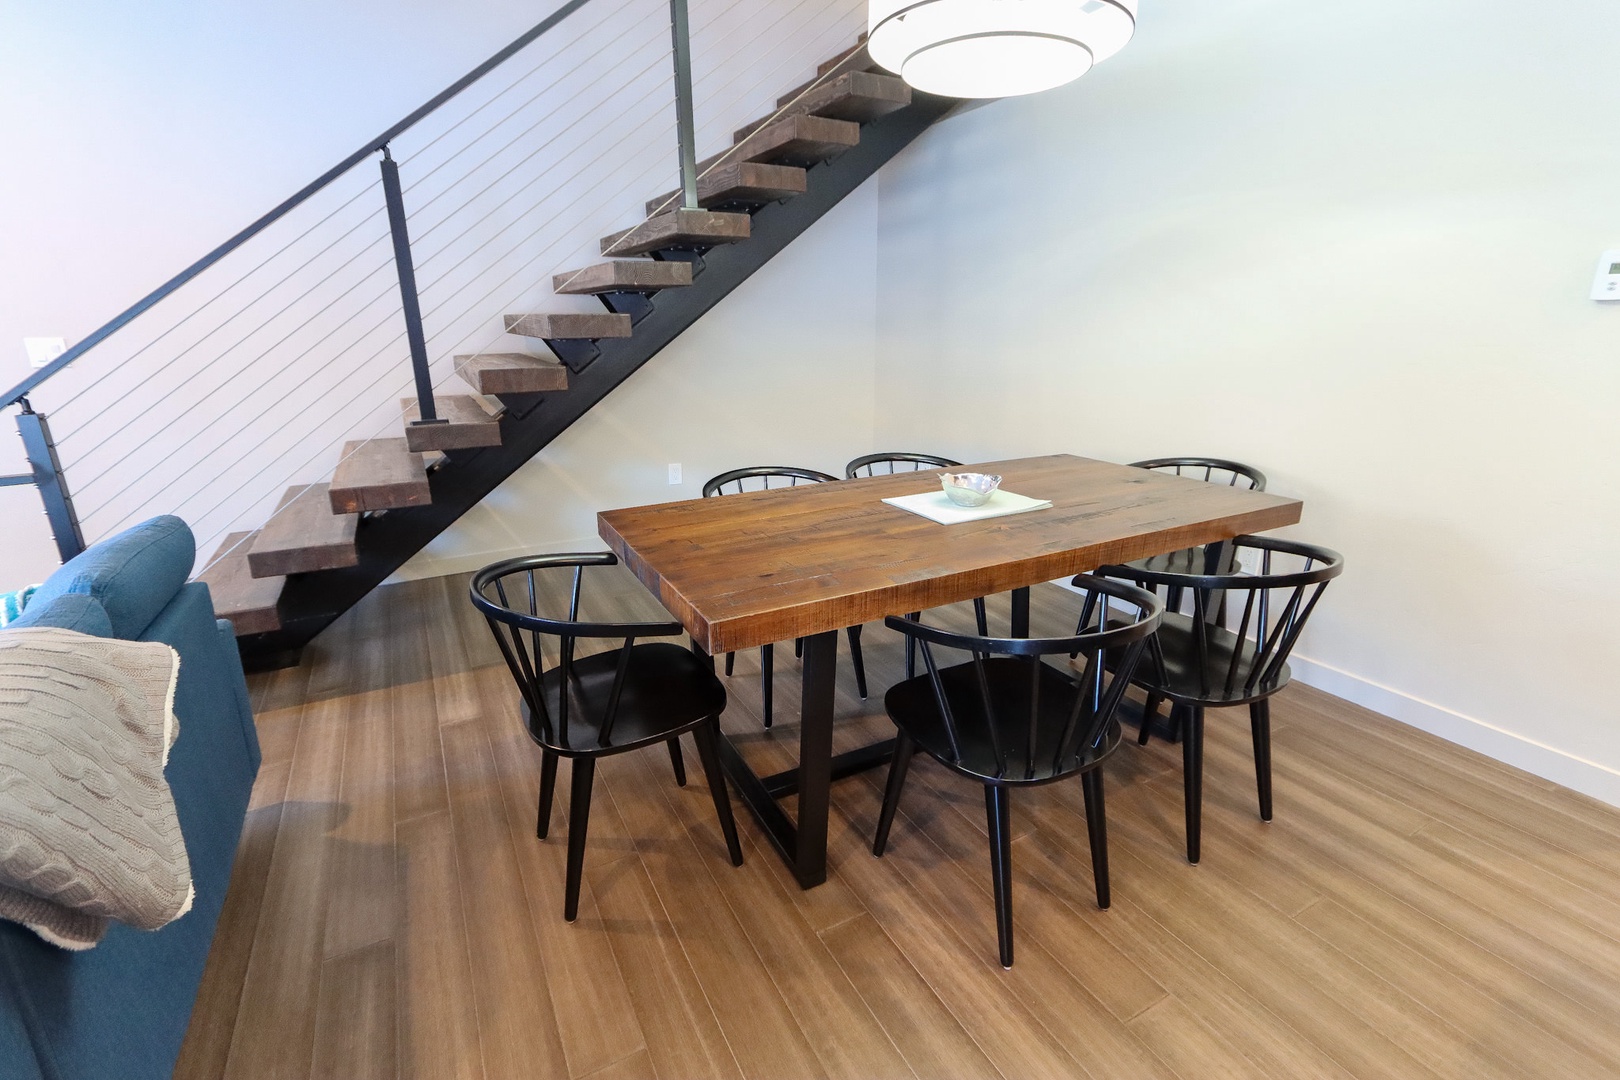 Formal dining table with seating for 6